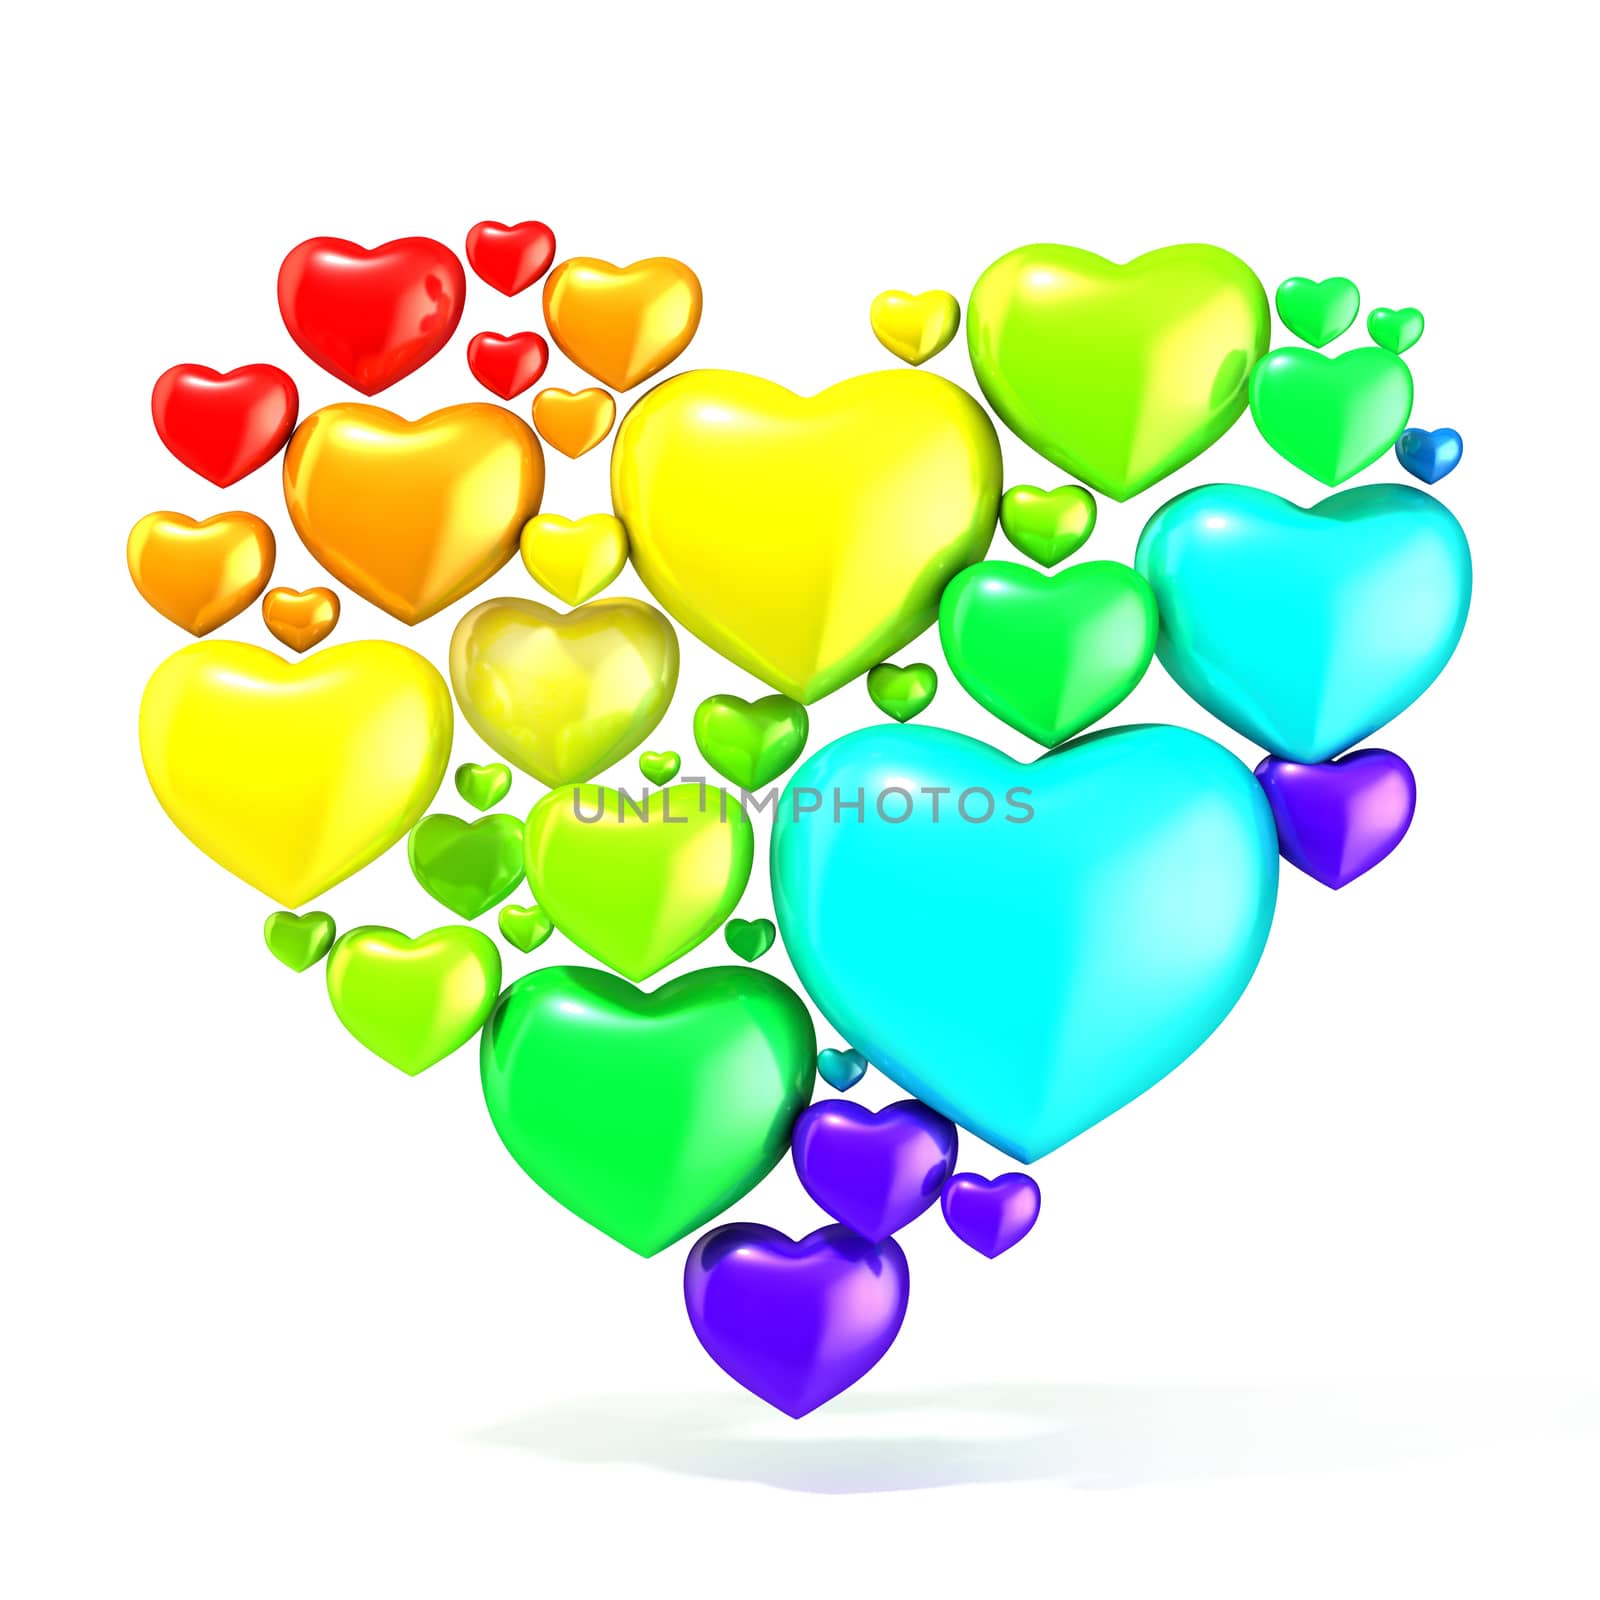 Sweet, colorful, beautiful hearts on white background, arranged in shape of big heart. 3D render illustration